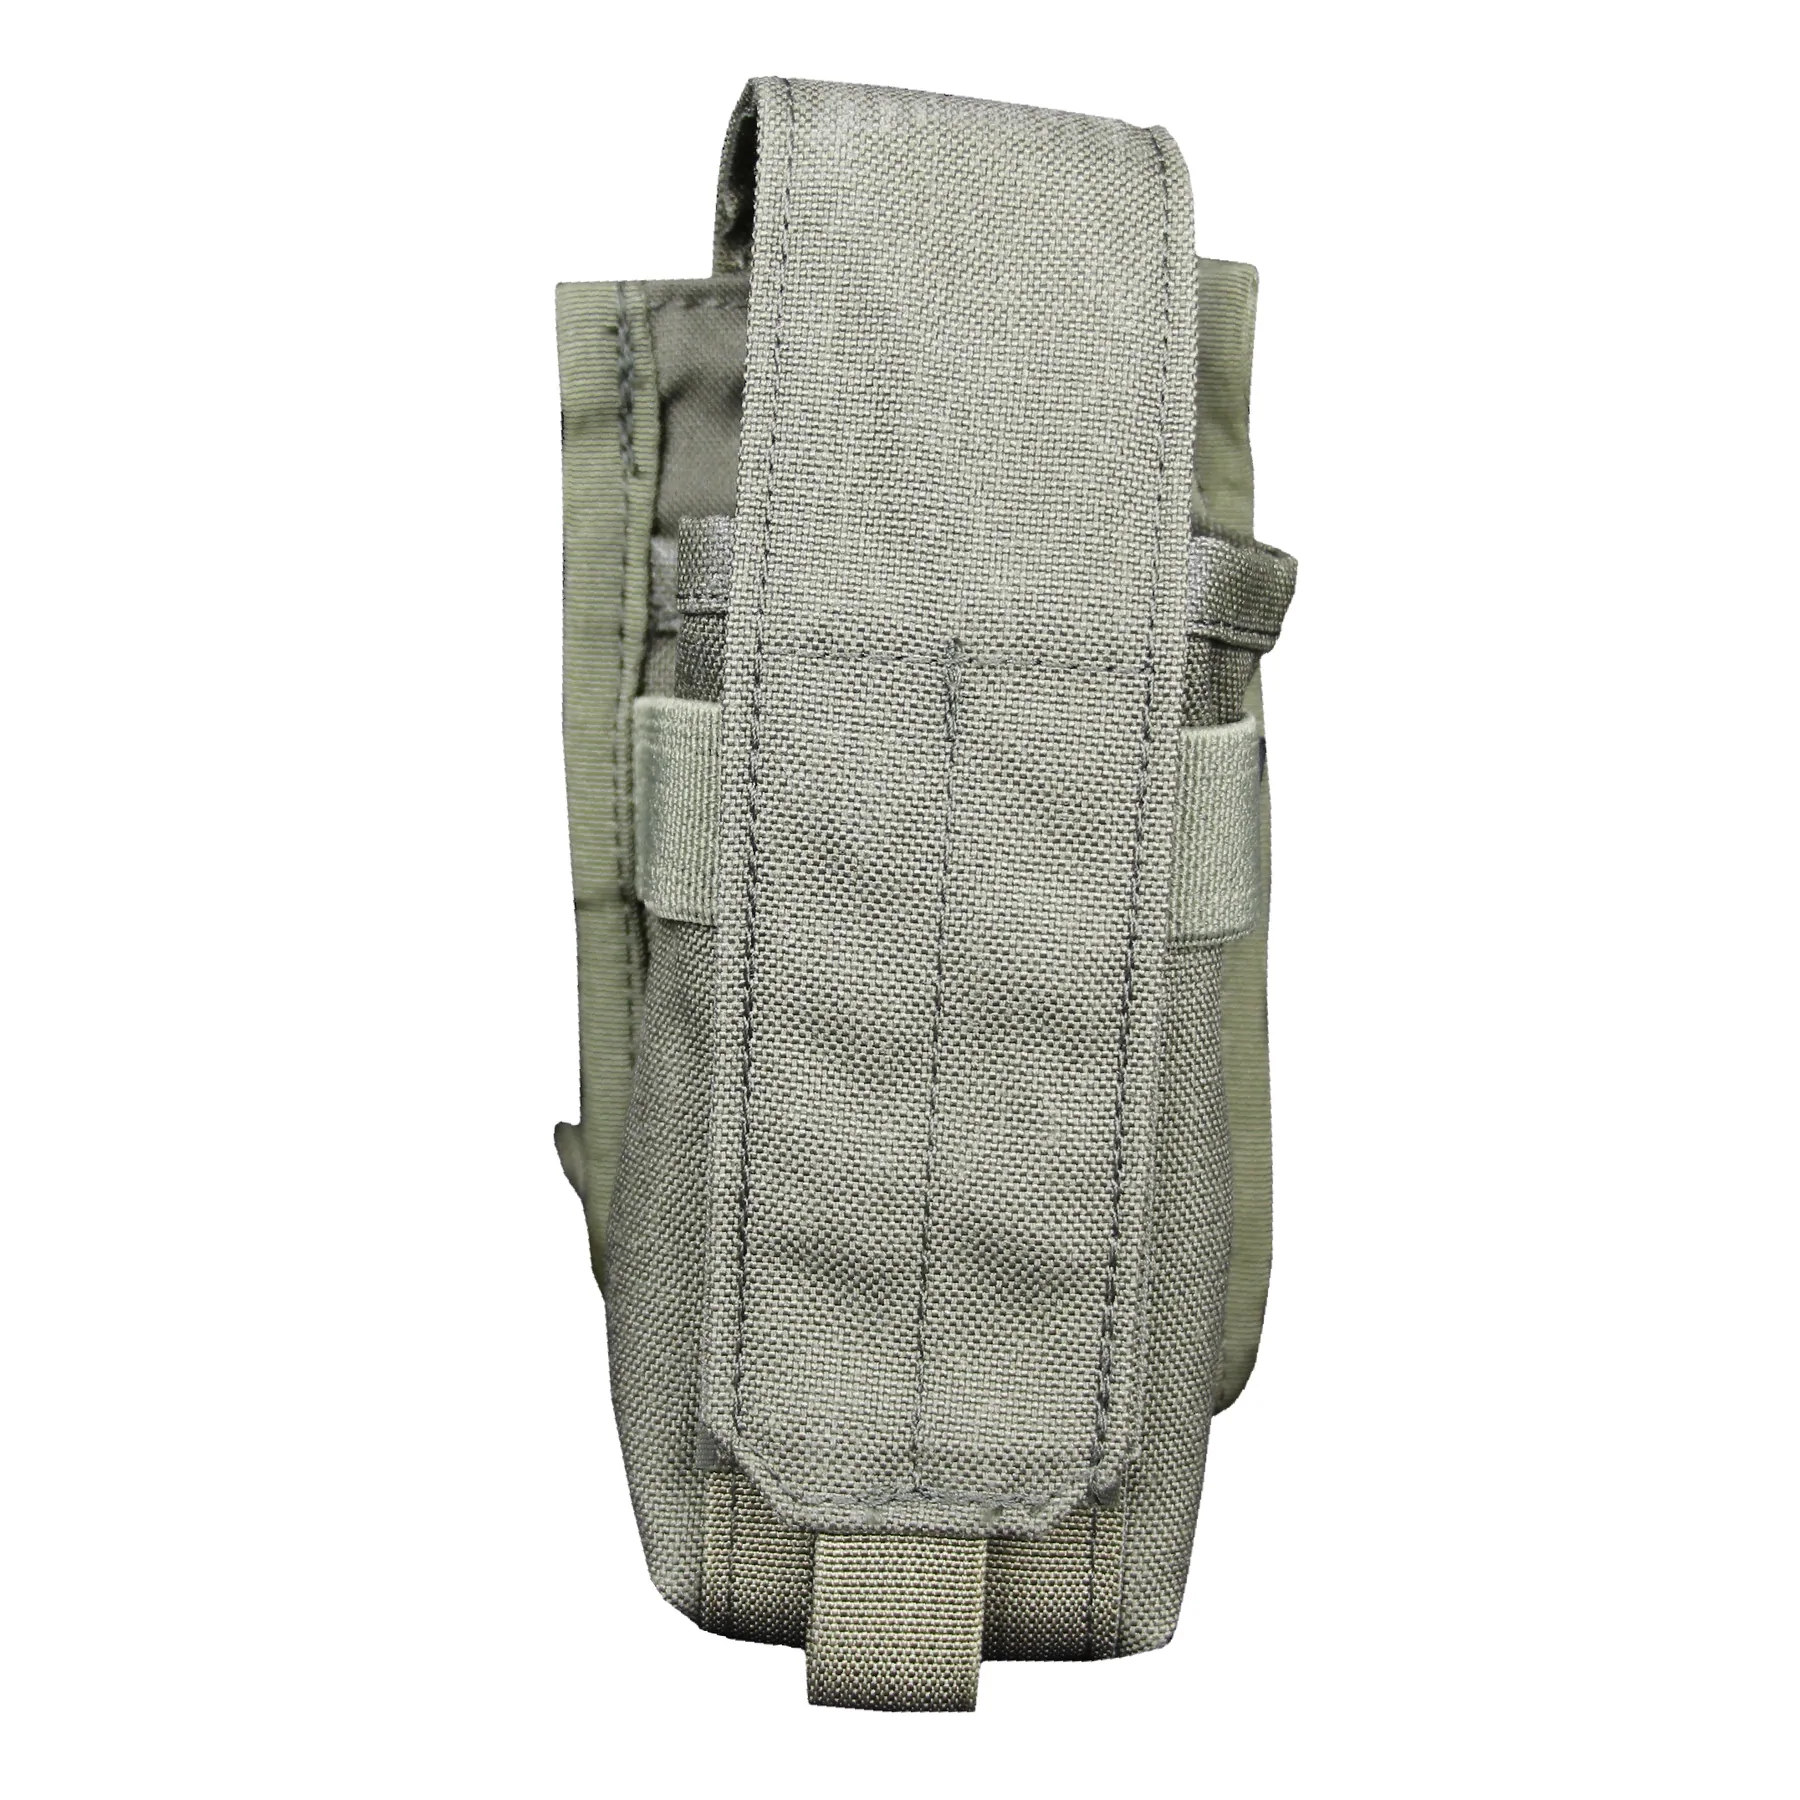 Marom Dolphin M4 Double Mag MOLLE Pussi aresmaxima.com